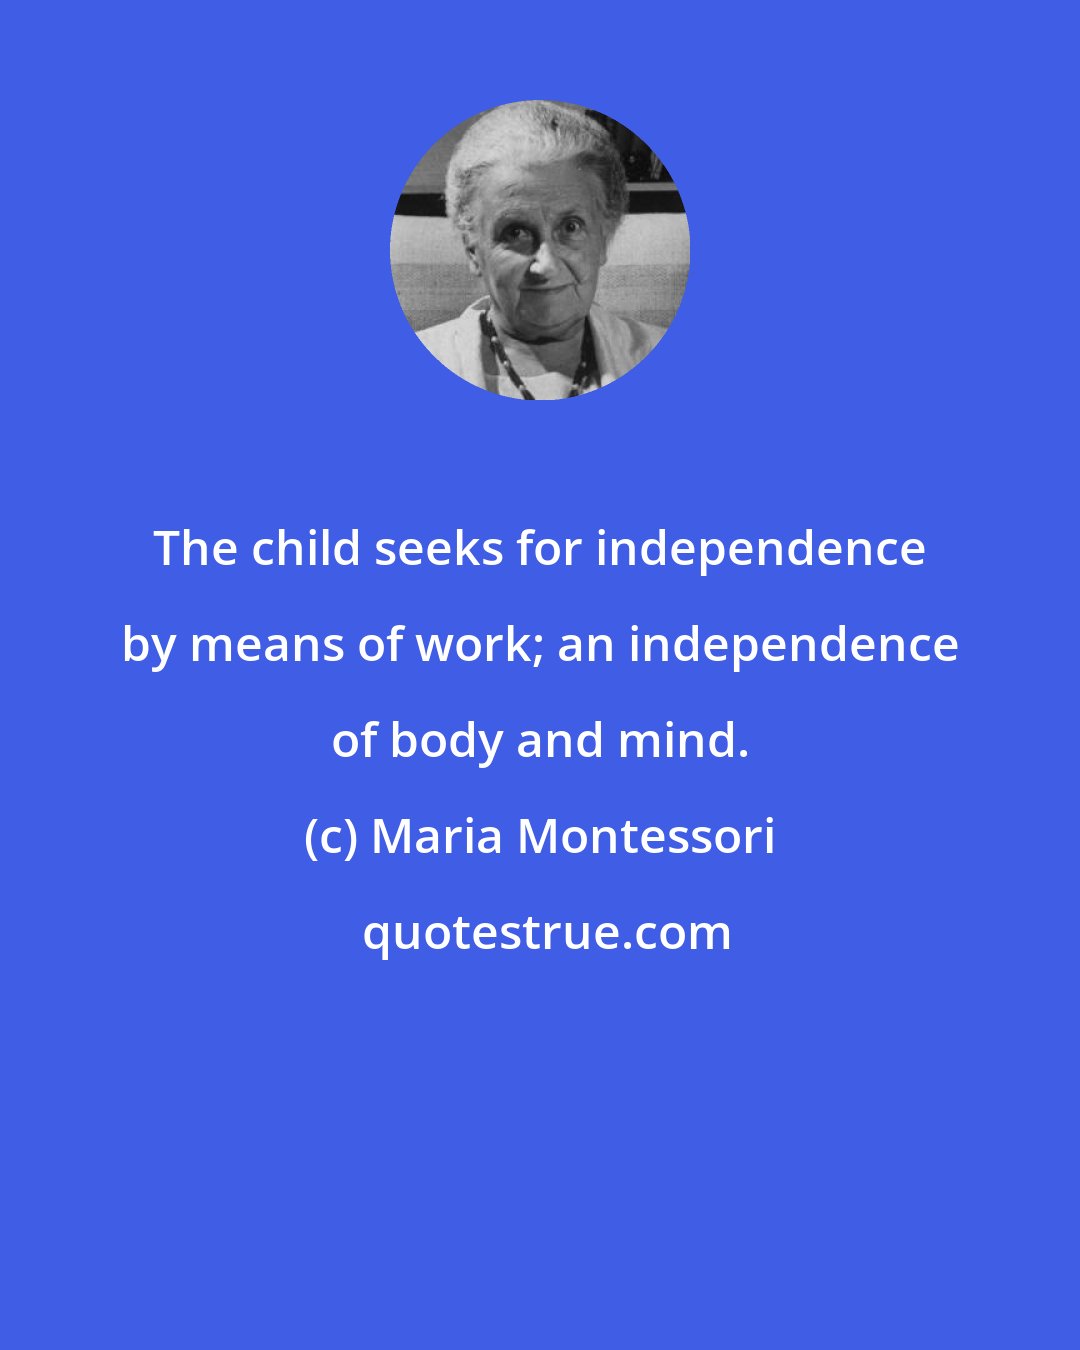 Maria Montessori: The child seeks for independence by means of work; an independence of body and mind.